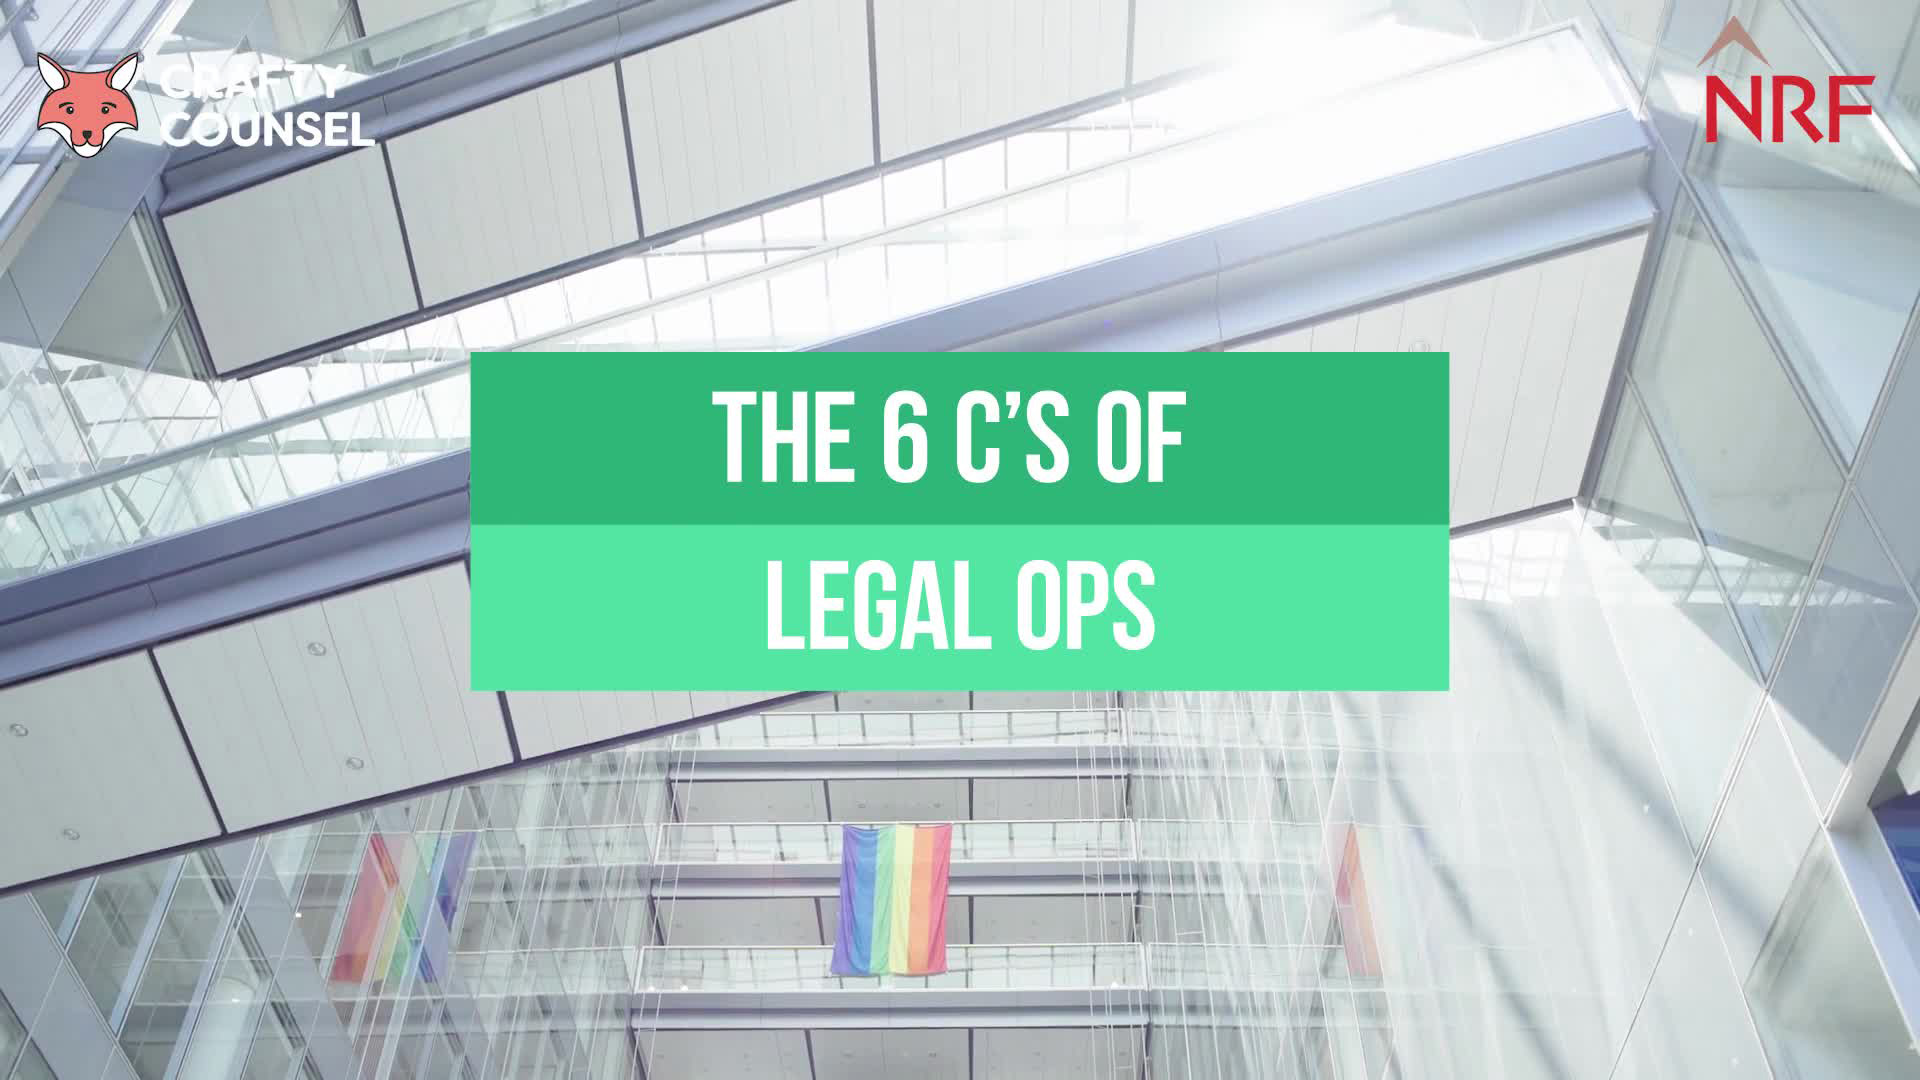 Episode 1: 6 C’s of Legal Ops - Cost effective